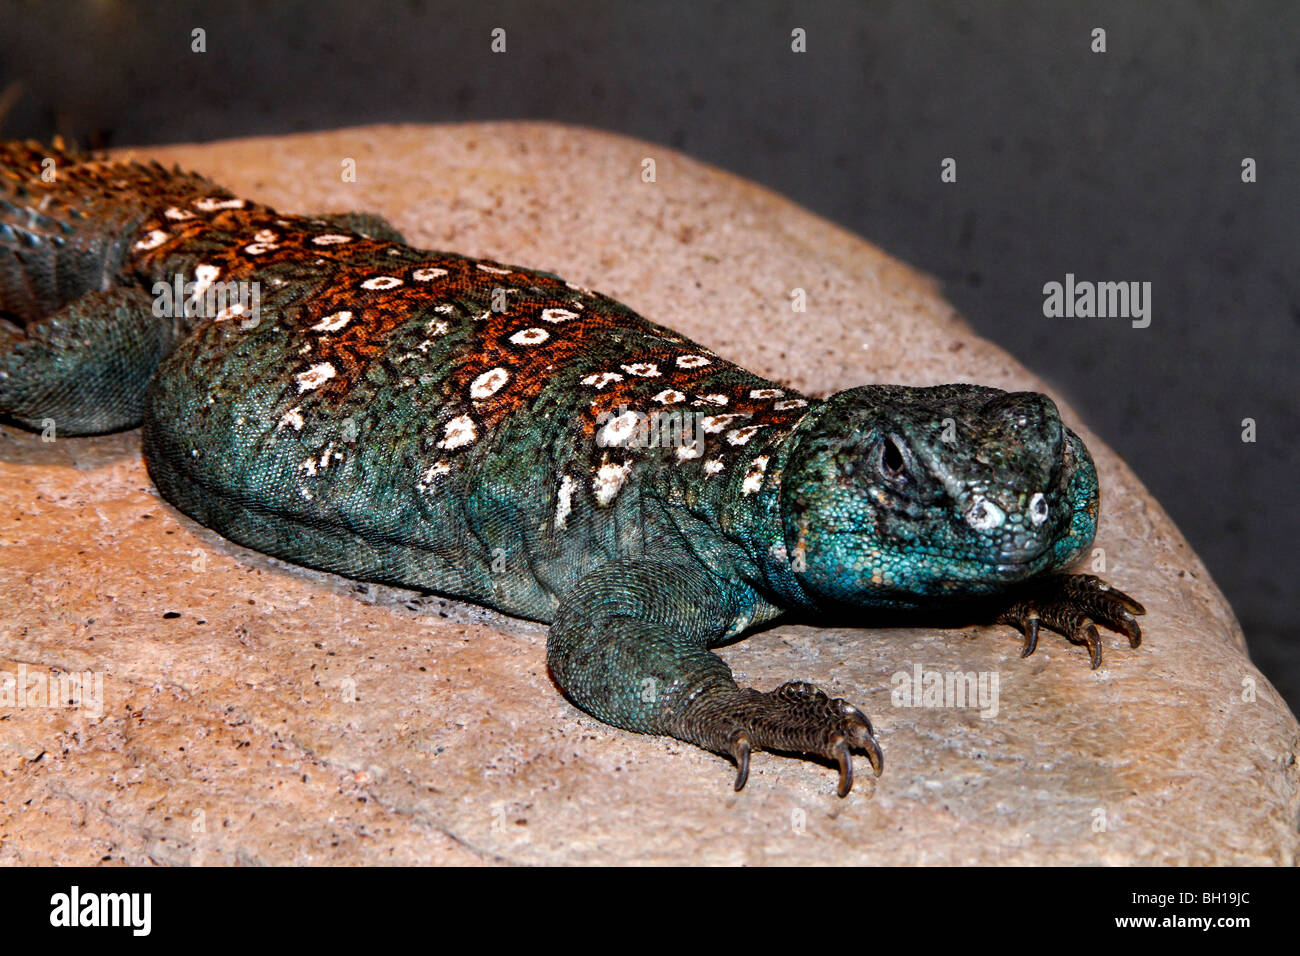 R-247D, OCELLATED DAB LIZARD ON ROCK,  Egypt, Stock Photo